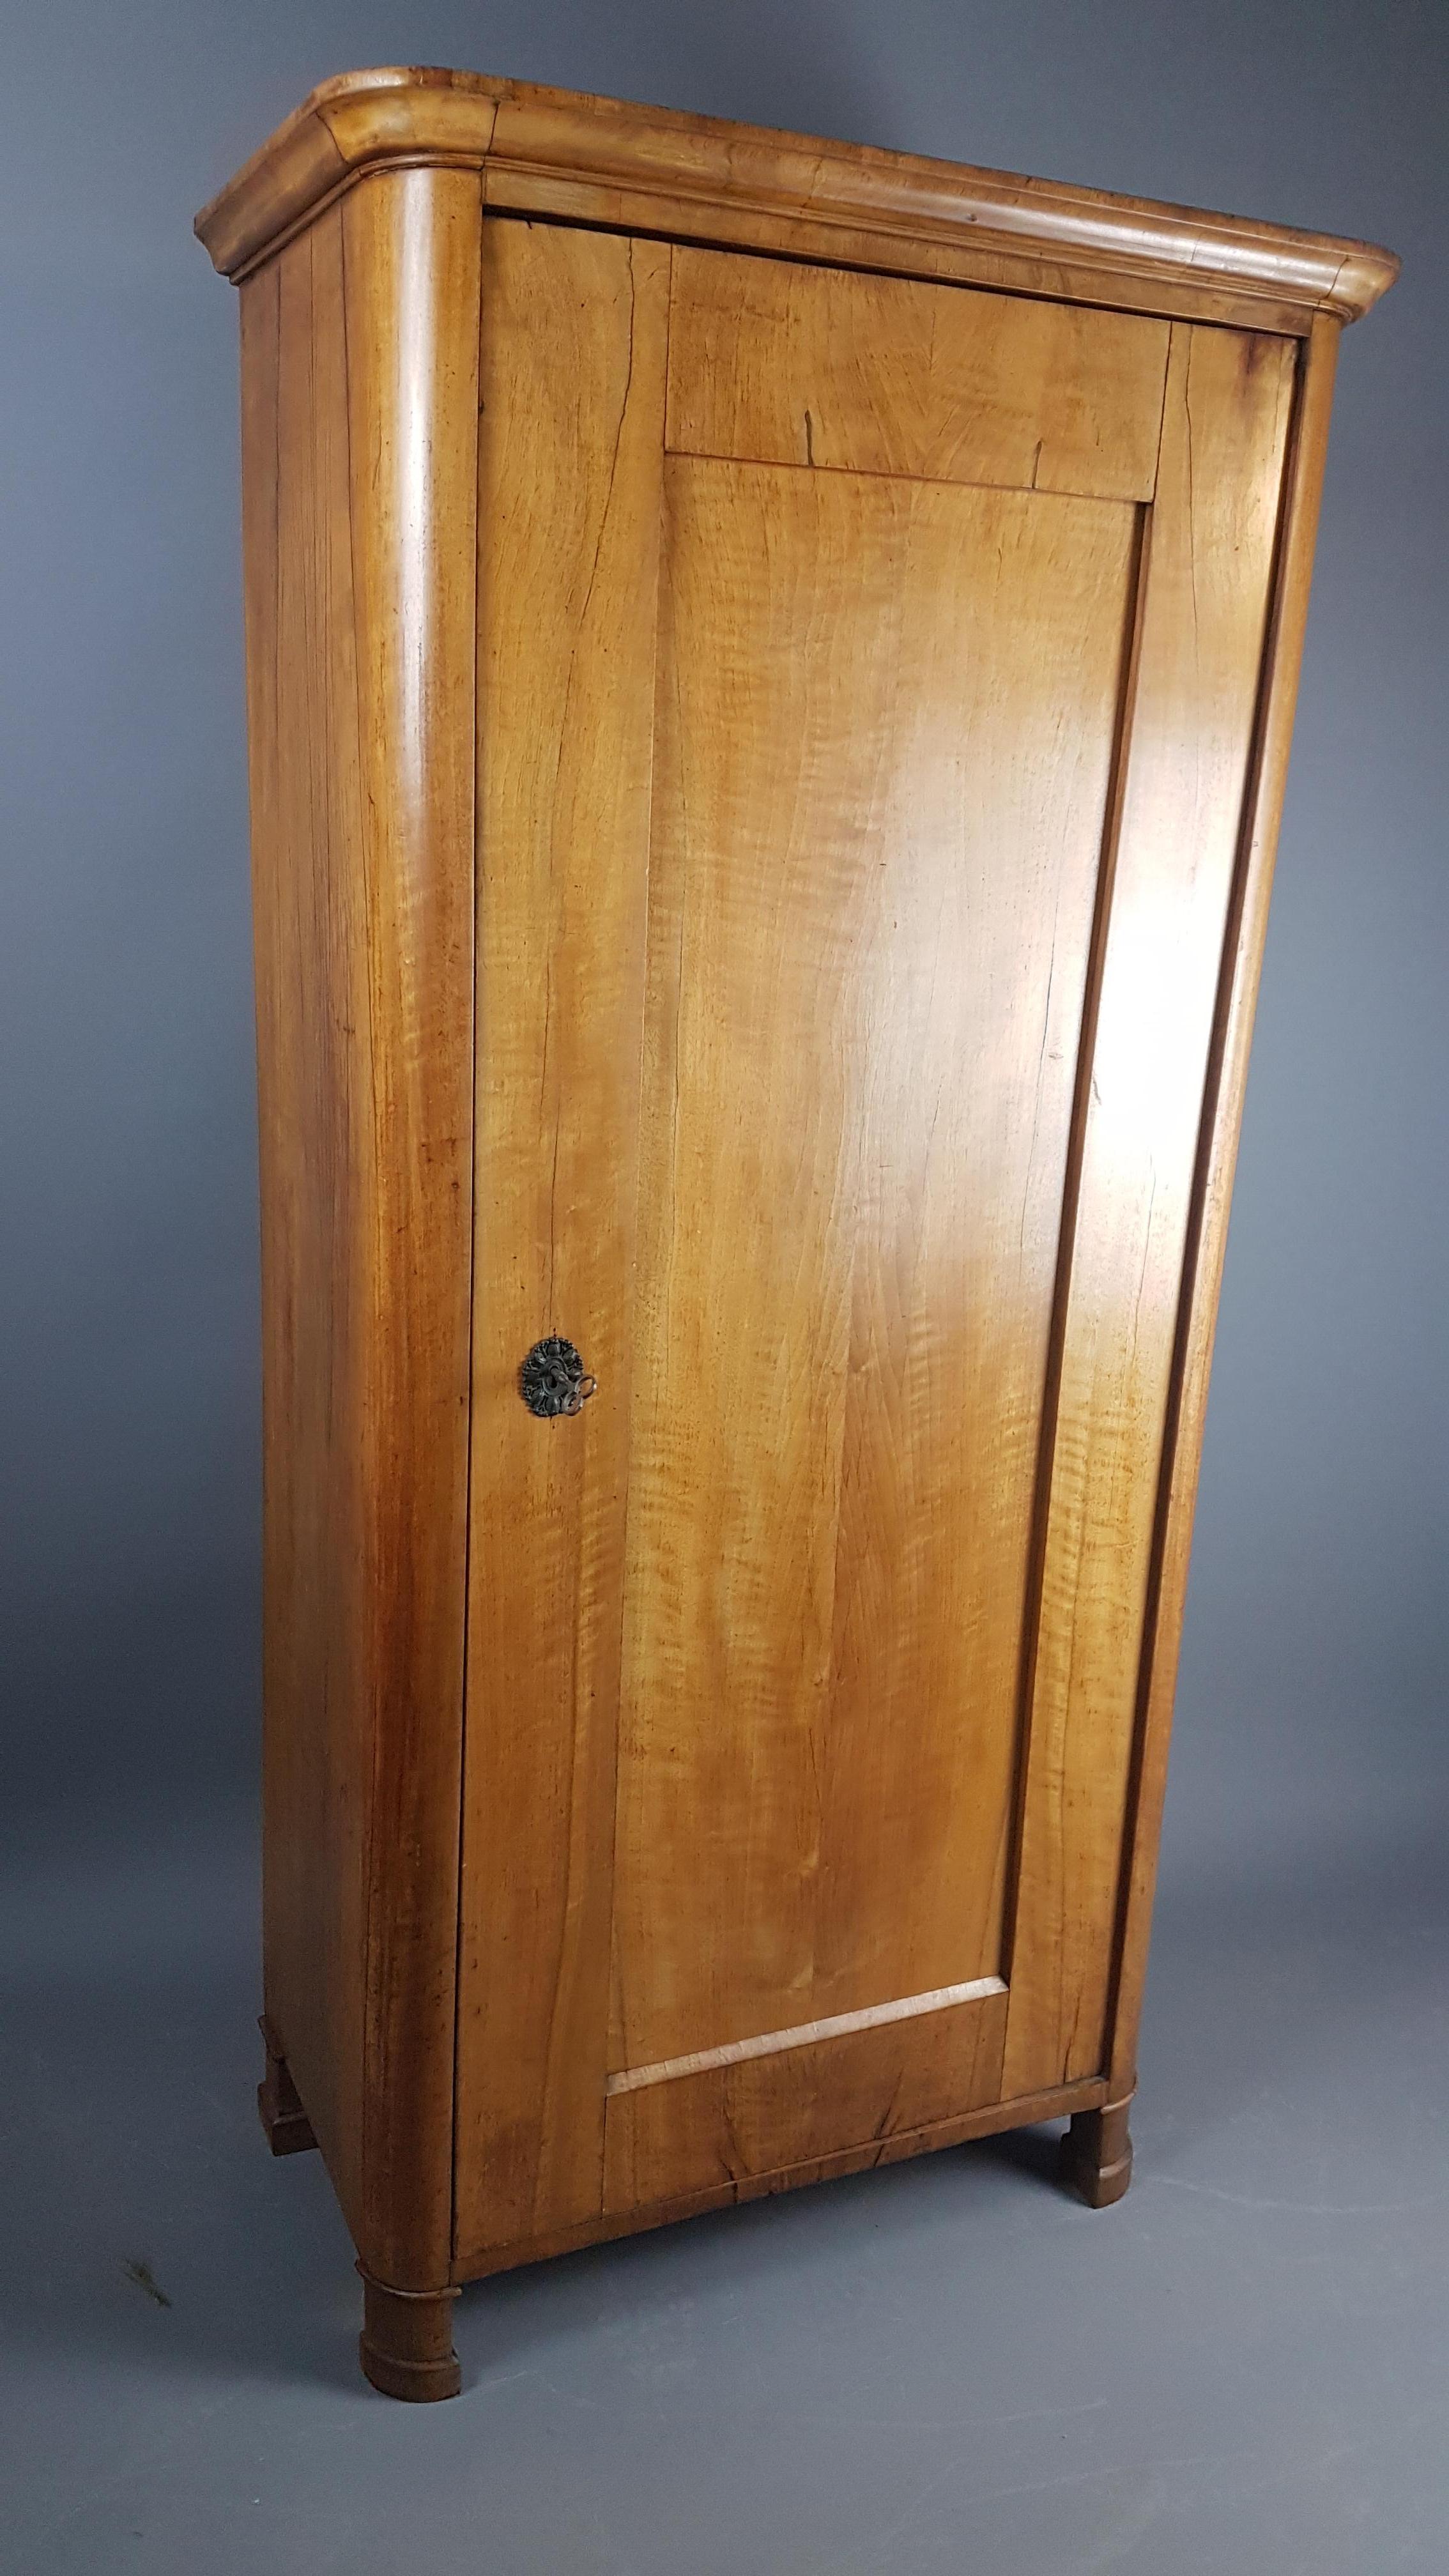 A nice narrow example of a pale walnut Biedermeier armoire or cupboard. The shelves are removable however are in set positions, it retains it's original finish and it is in overall nice condition with normal marks & knocks from use. The lock has a